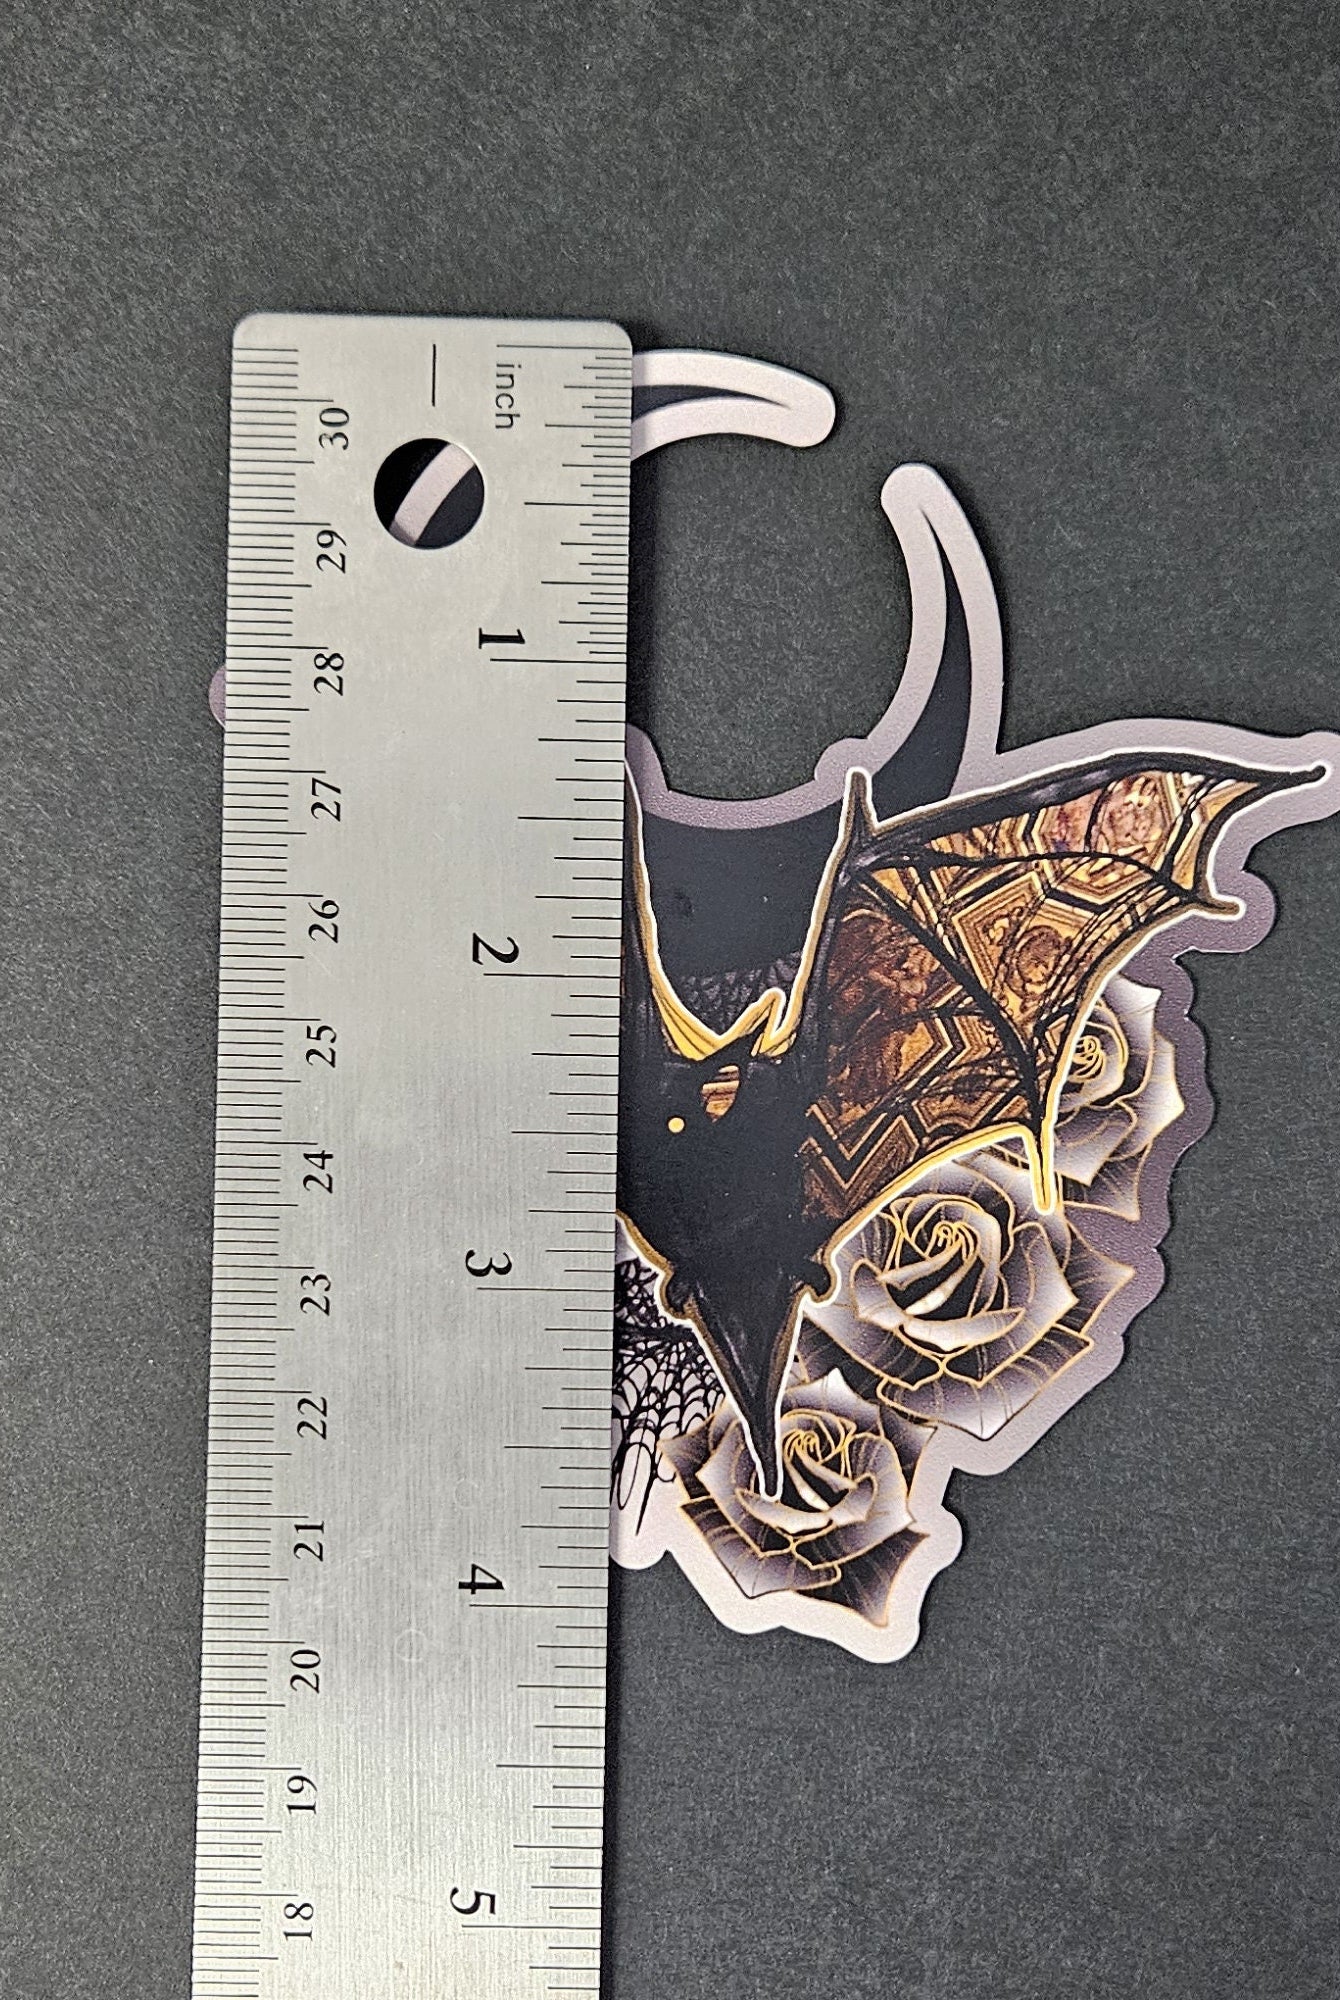 MAGNET: Florence Bat with Black Moon , Bat with Frescos and Night Sky Decorative Magnet , Bat and Moon Art Magnet , Bat and Moon Magnet